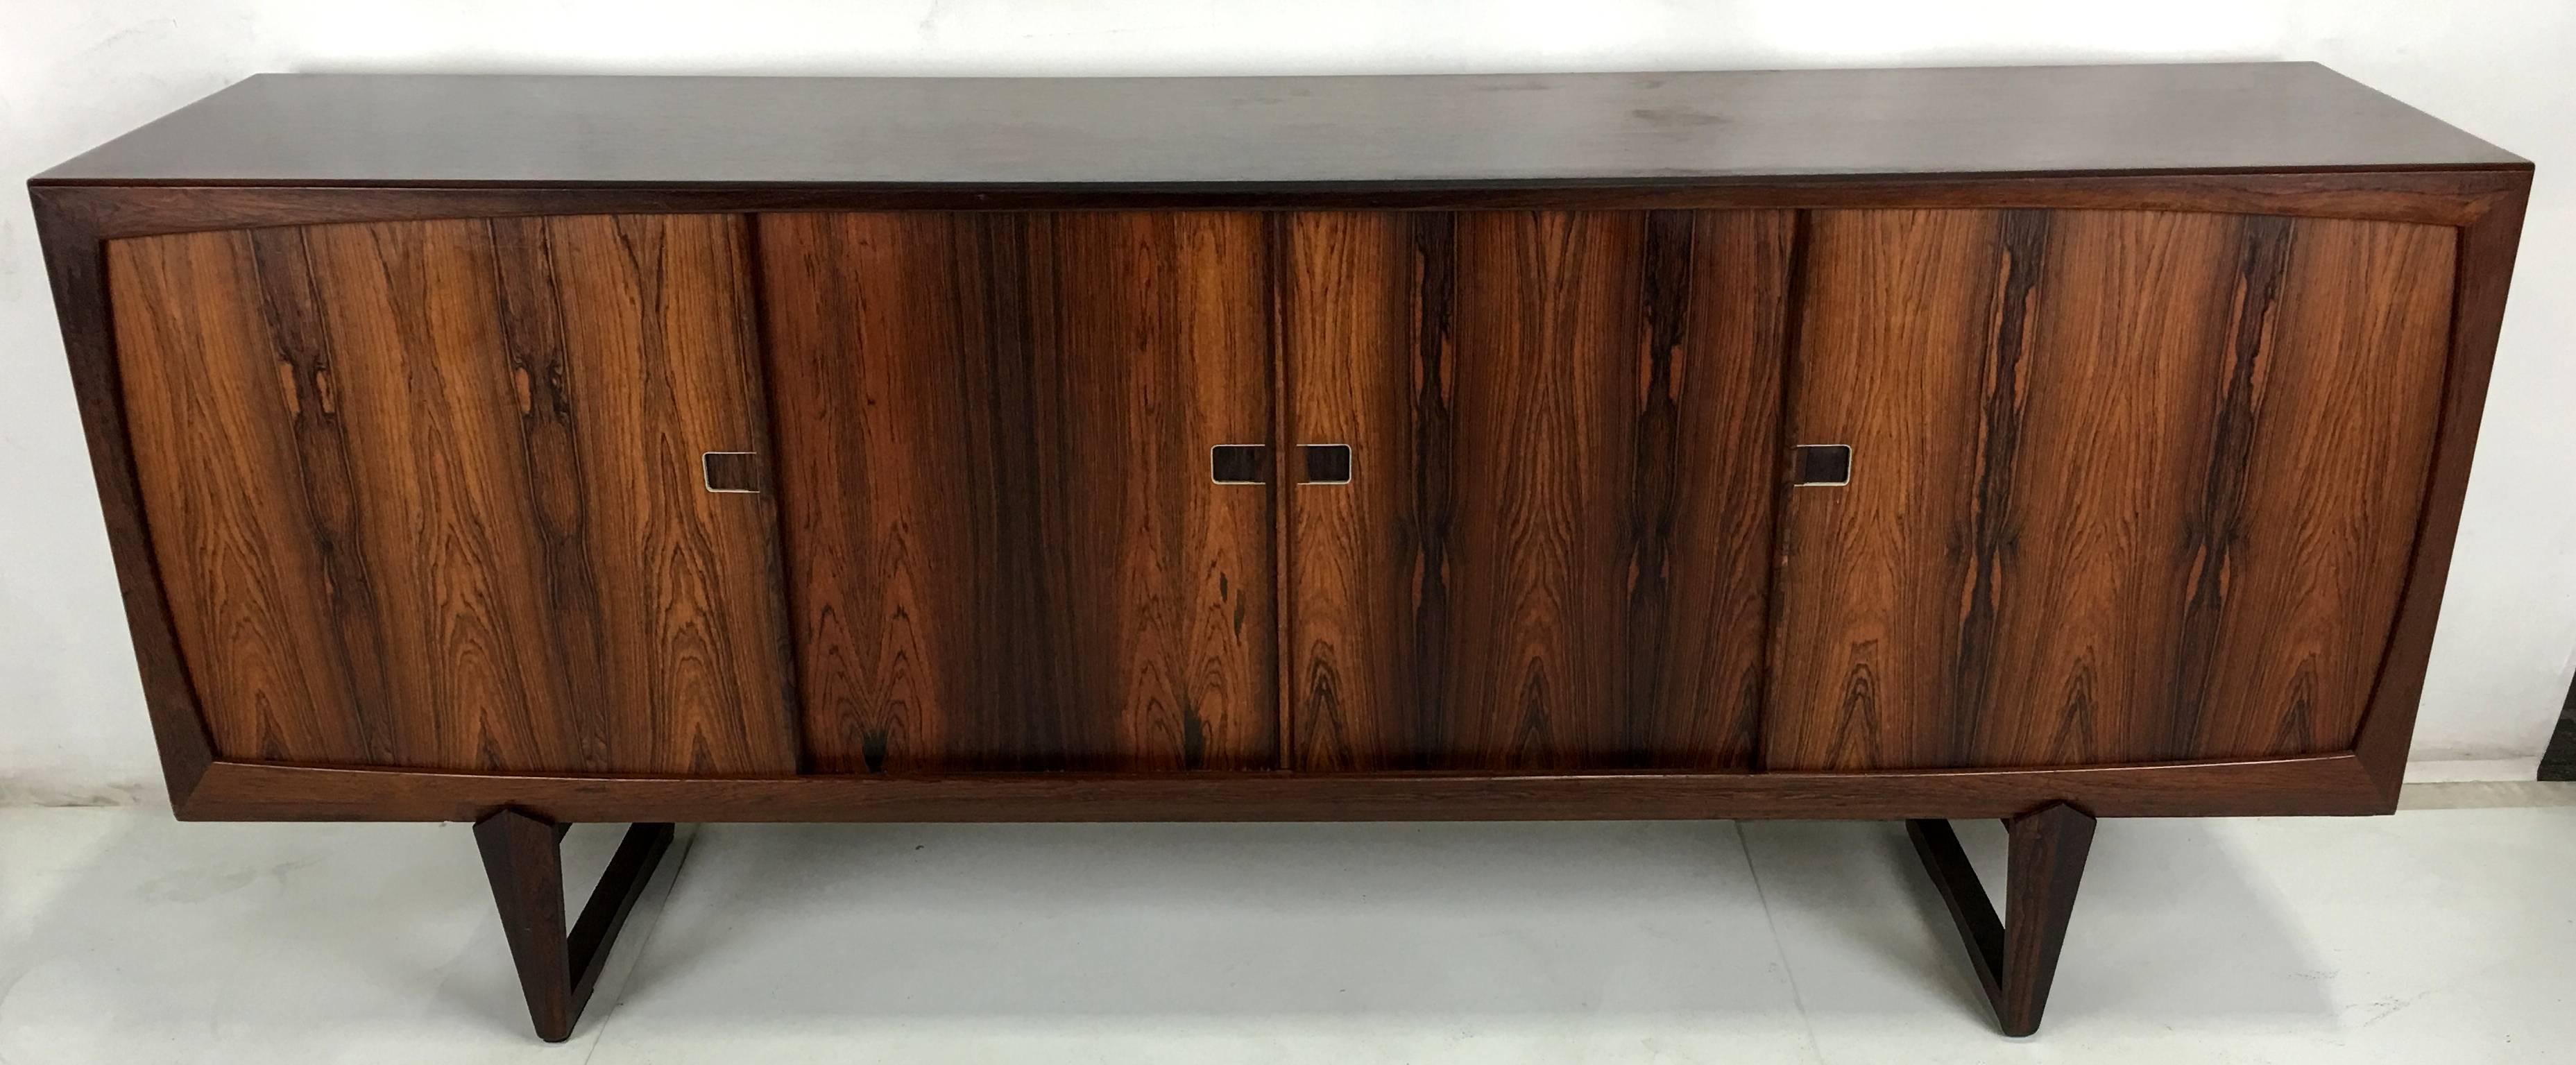 Vividly grained and super quality Danish rosewood credenza with sculptural sled style base. The cabinet is superbly crafted and the rosewood finger pulls are lined with stainless steel. The two end compartments conceal adjustable shelves and the